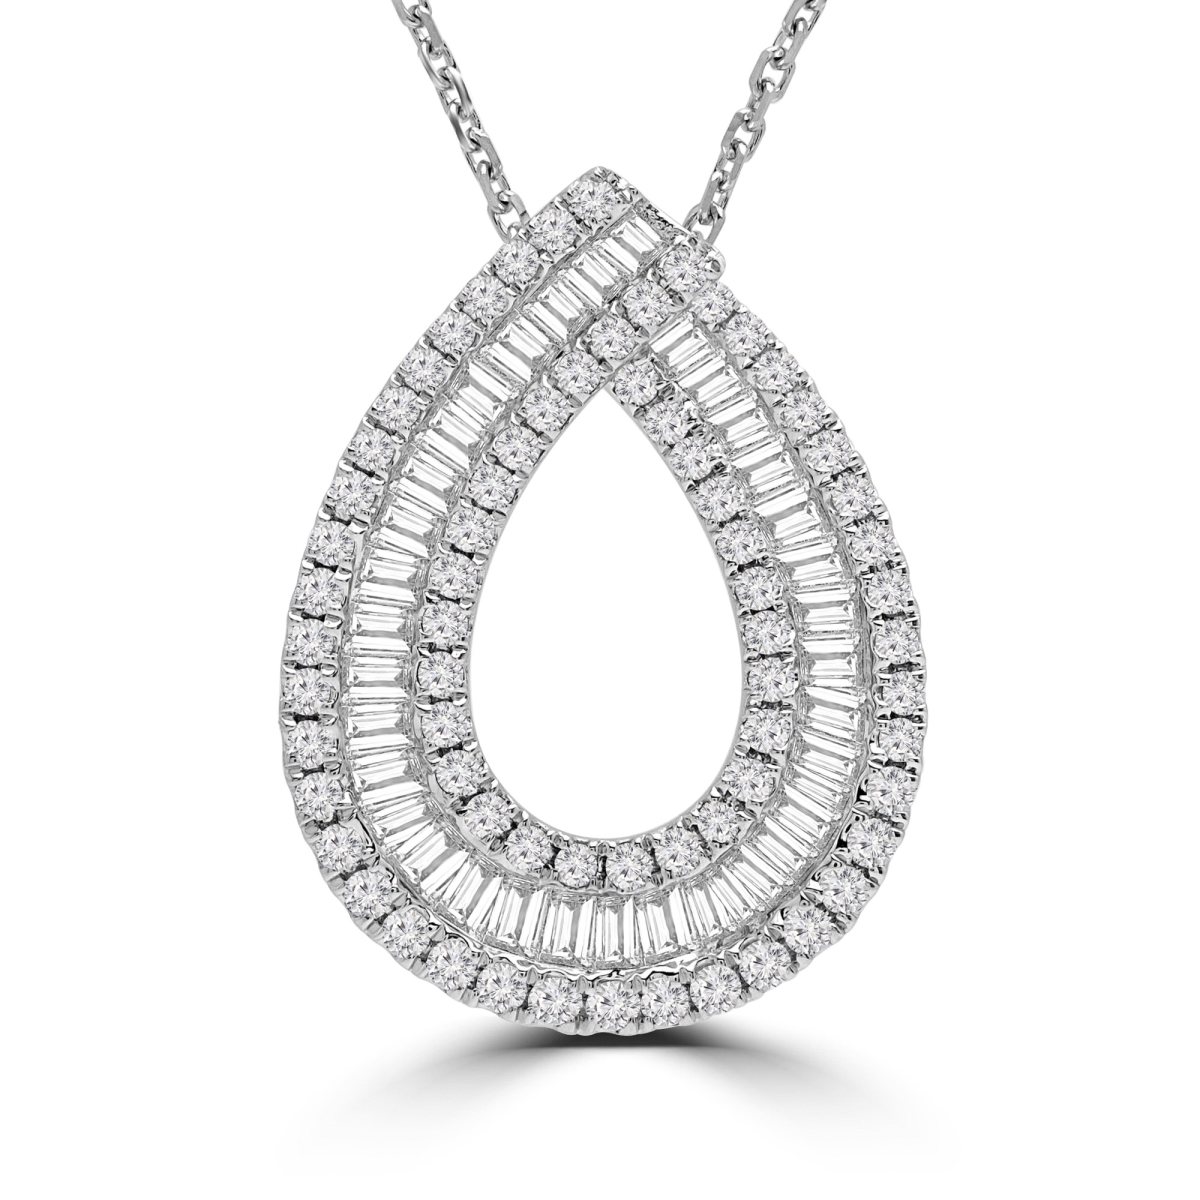 Picture of Majesty Diamonds MD190307 1.14 CTW Baguette Diamond Three-Row Fancy Pendant Necklace in 18K White Gold